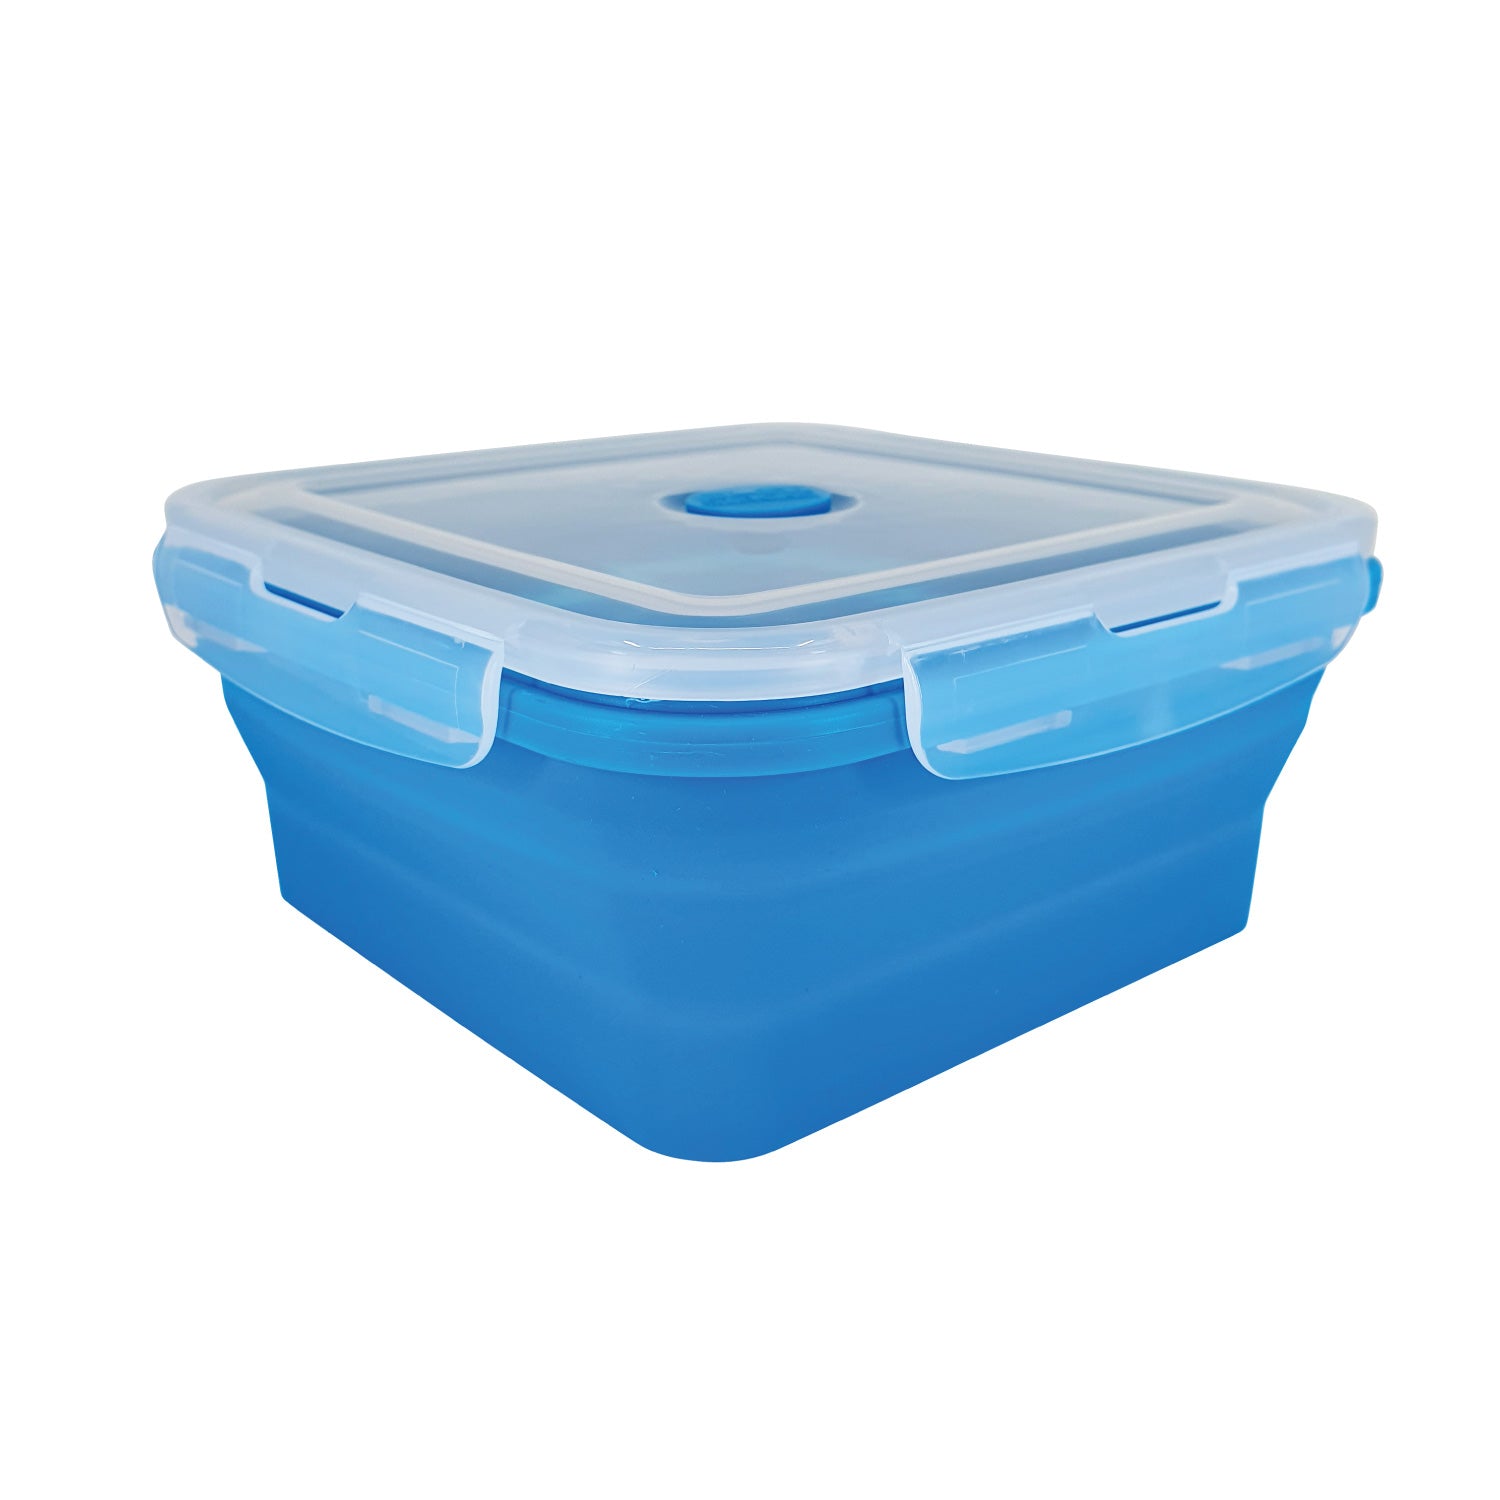  Flat Stacks Collapsible Storage Containers